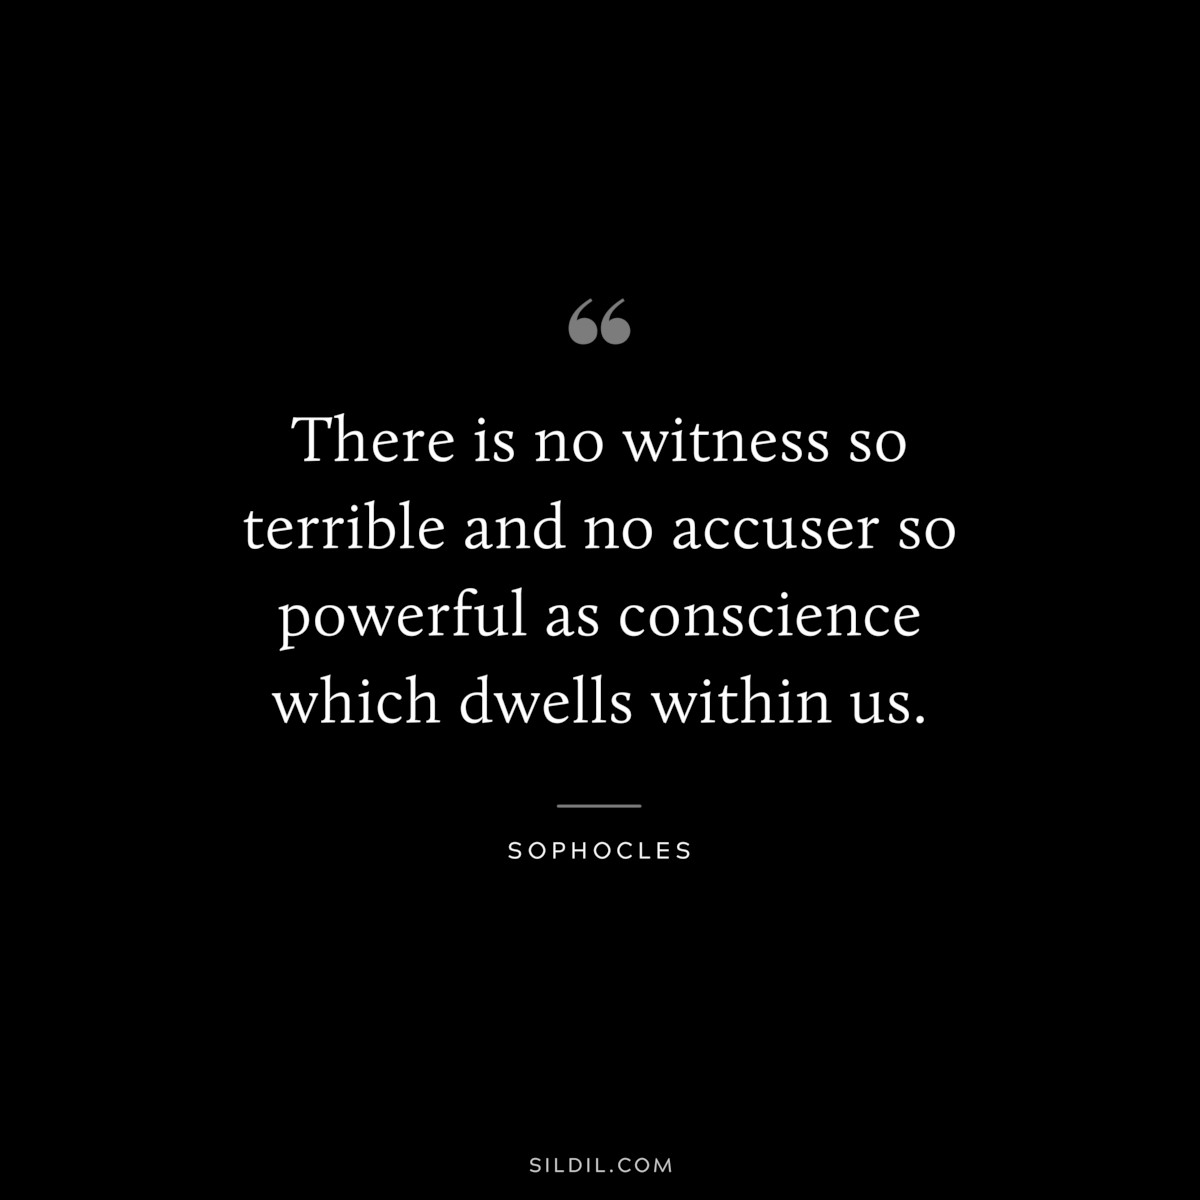 There is no witness so terrible and no accuser so powerful as conscience which dwells within us. ― Sophocles